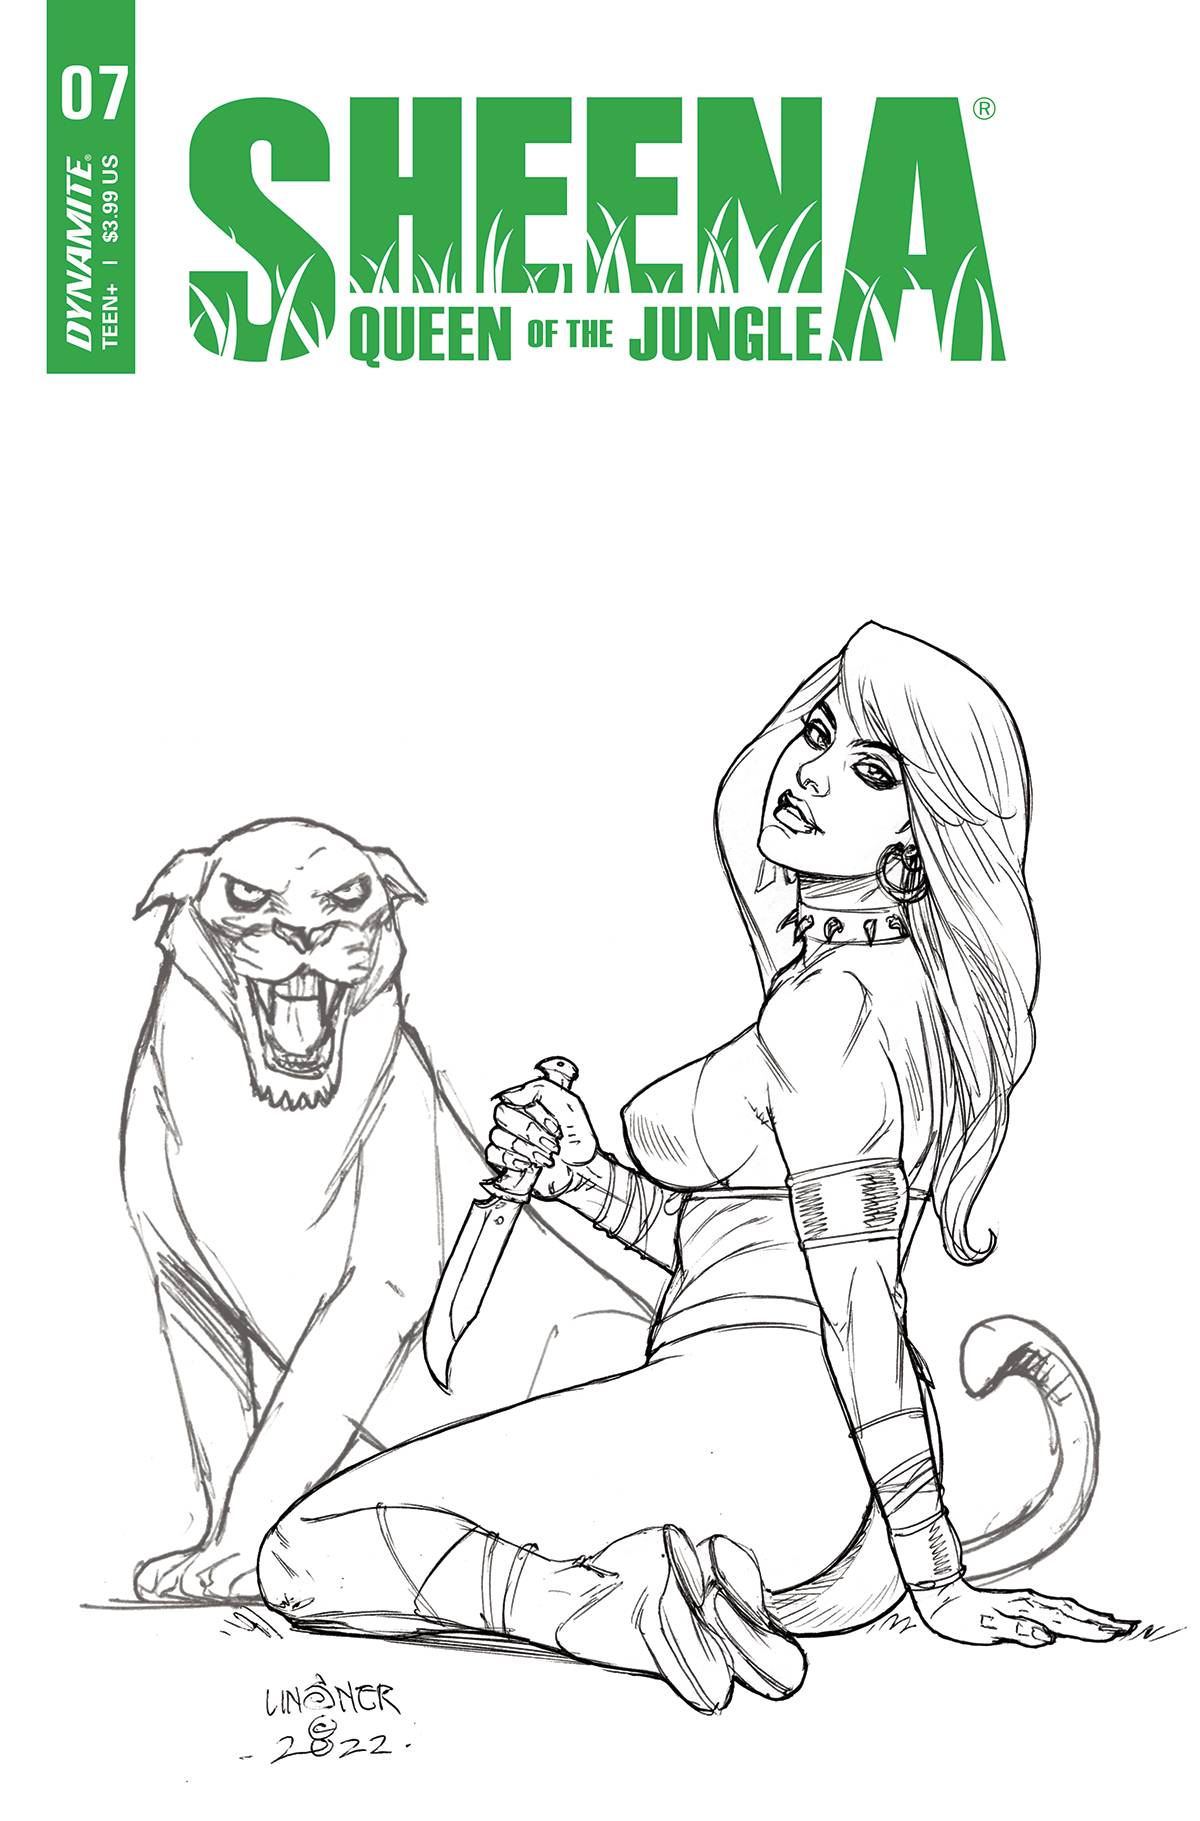 SHEENA QUEEN OF THE JUNGLE #7 1:10 LINSNER B&W VARIANT